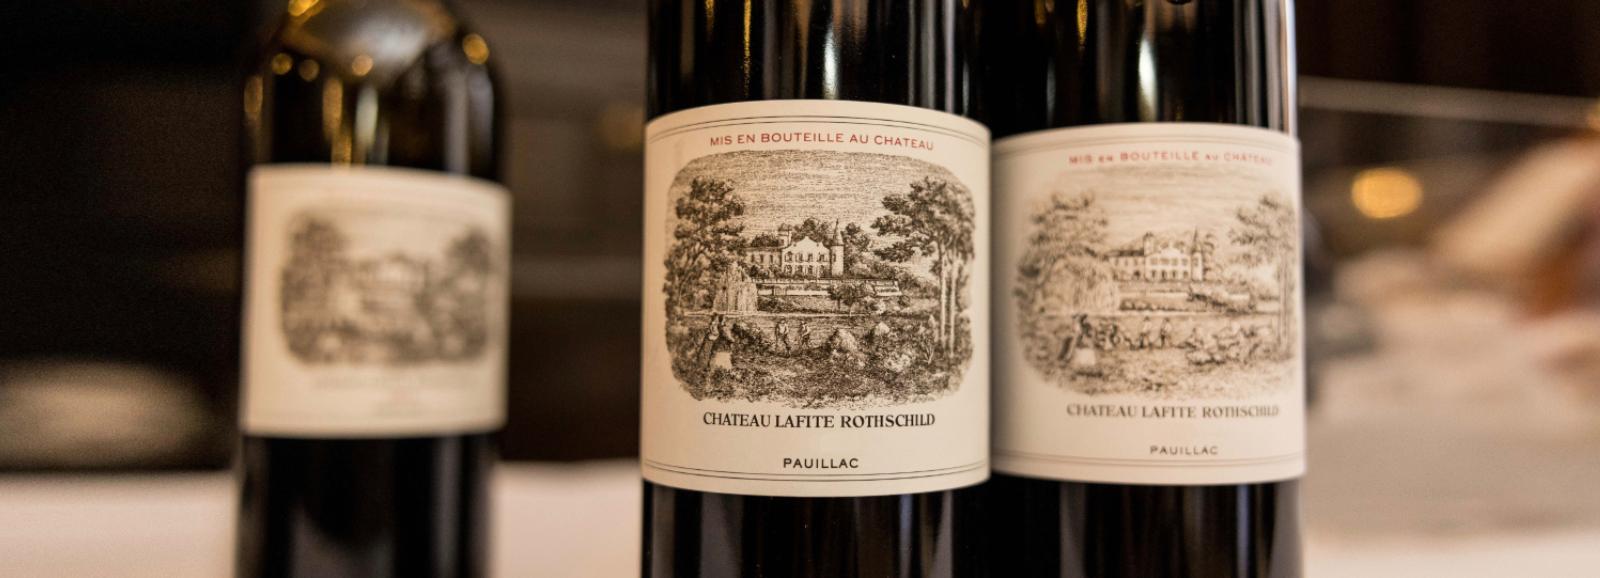 wine bottles from chateau lafite rothschild